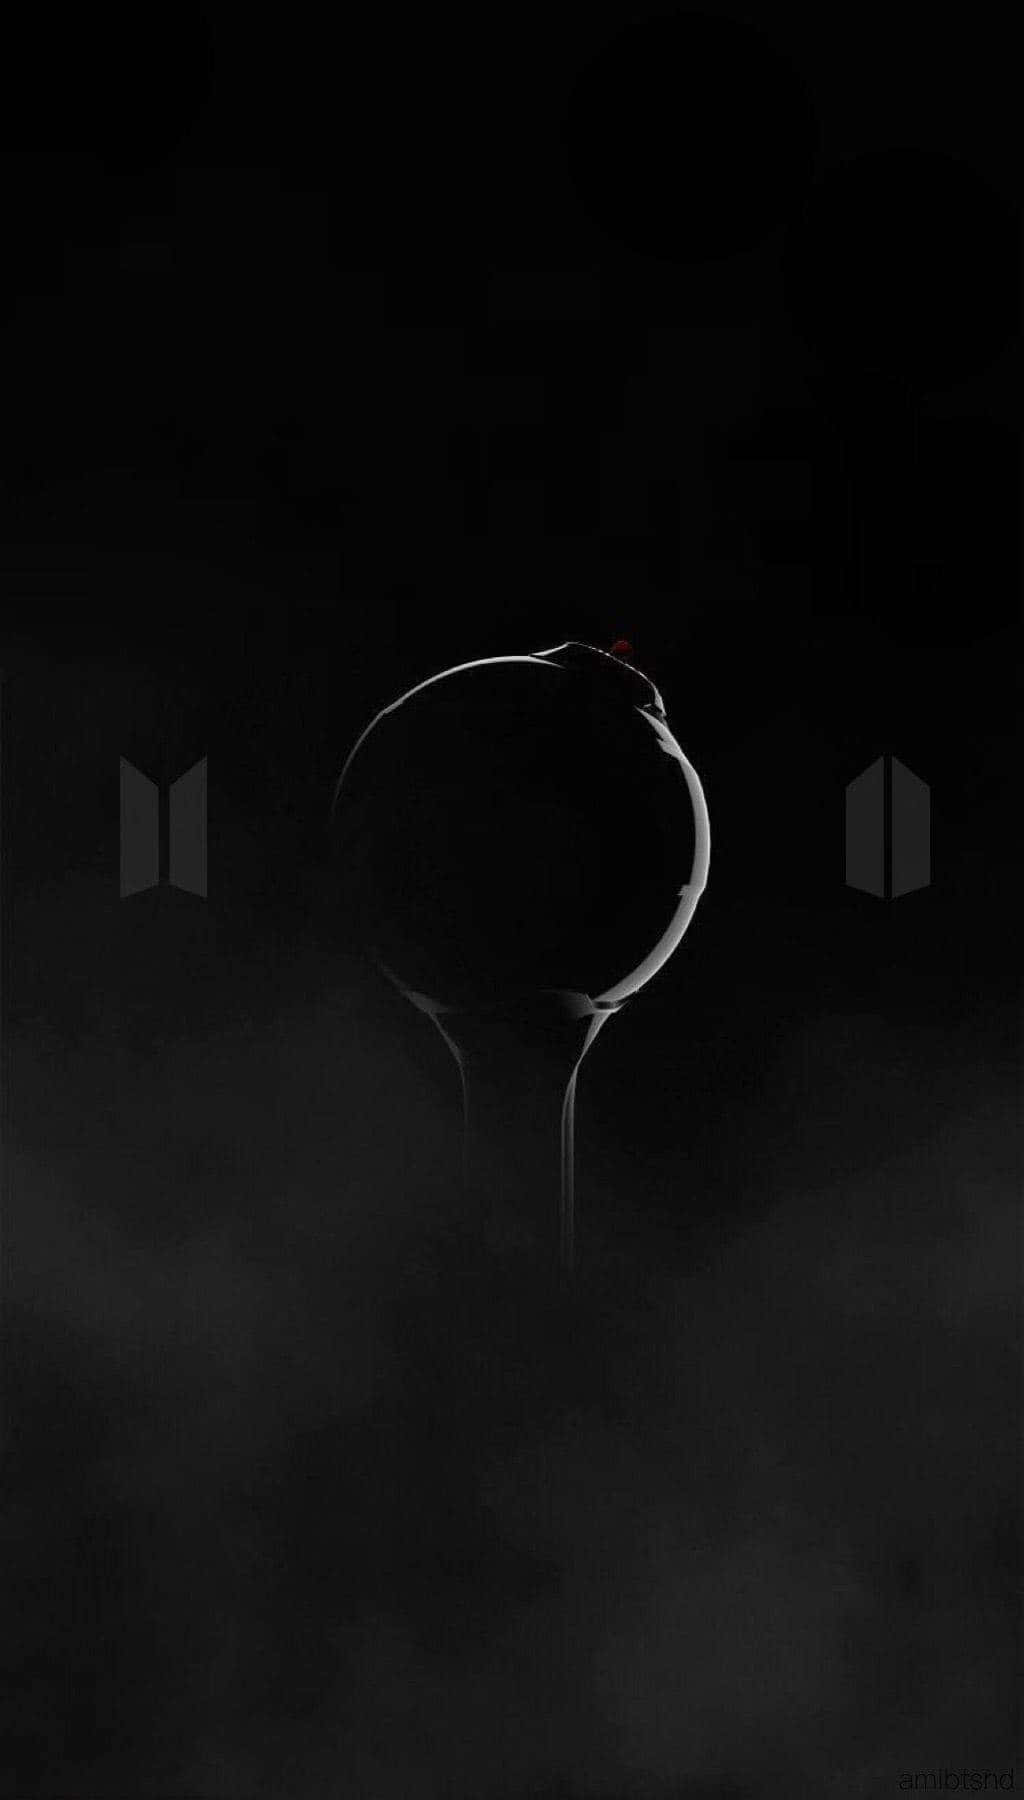 Light up your world with the colorful BTS Army Bomb Wallpaper